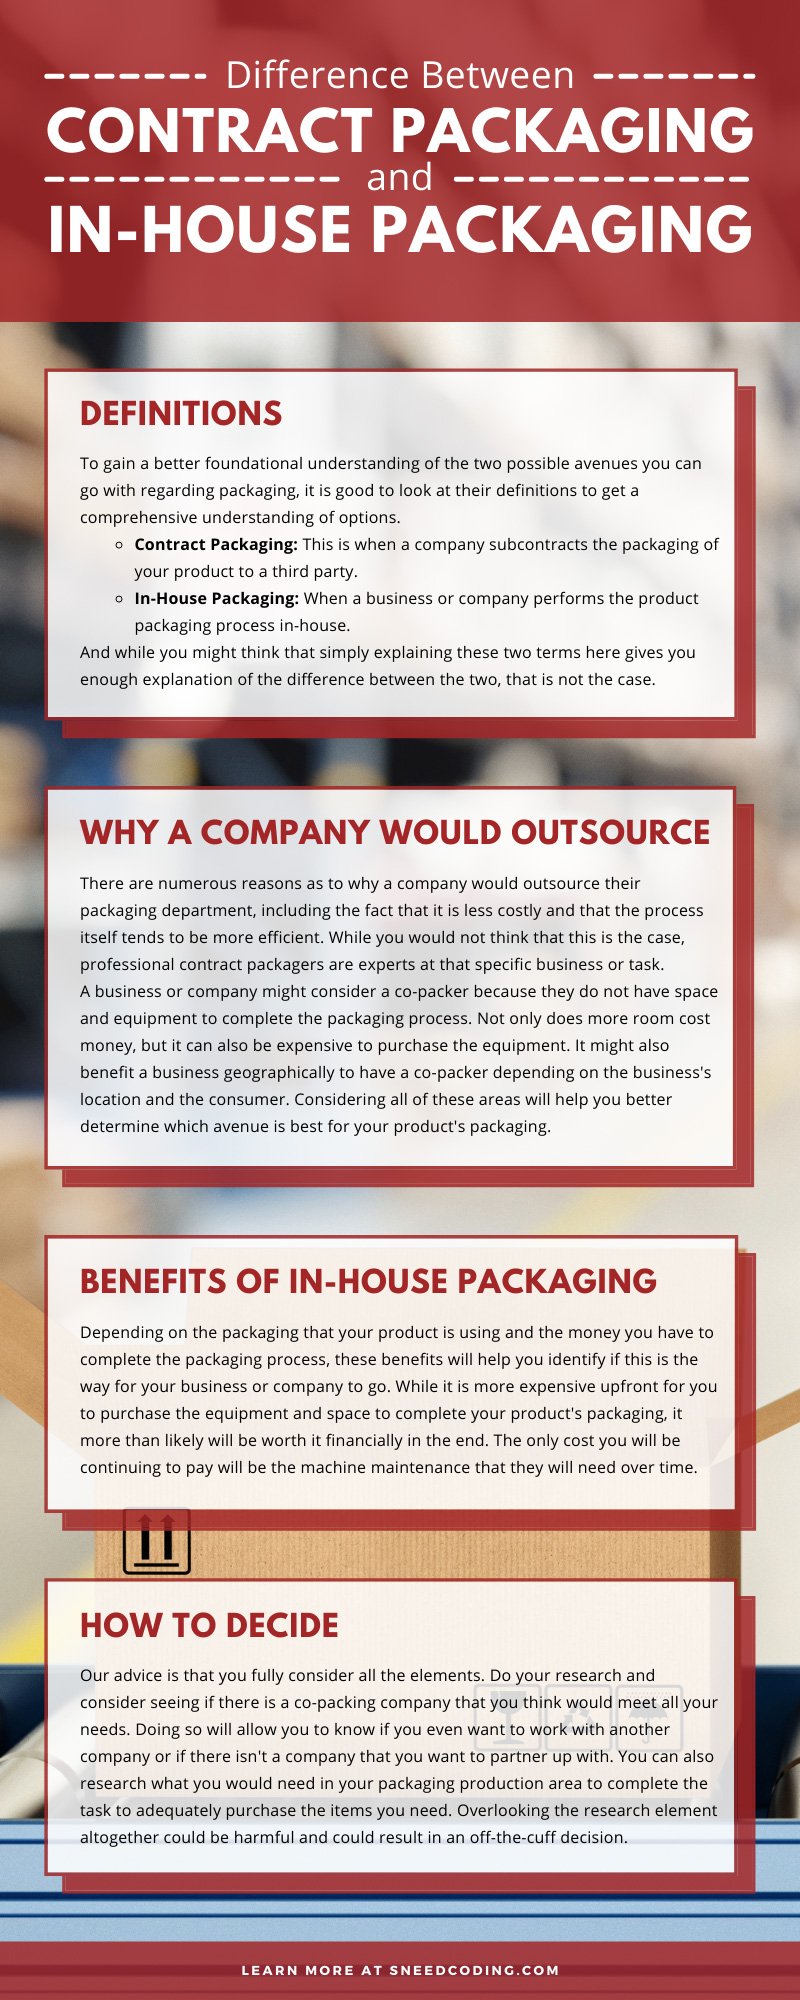 Difference Between Contract Packaging and In-House Packaging